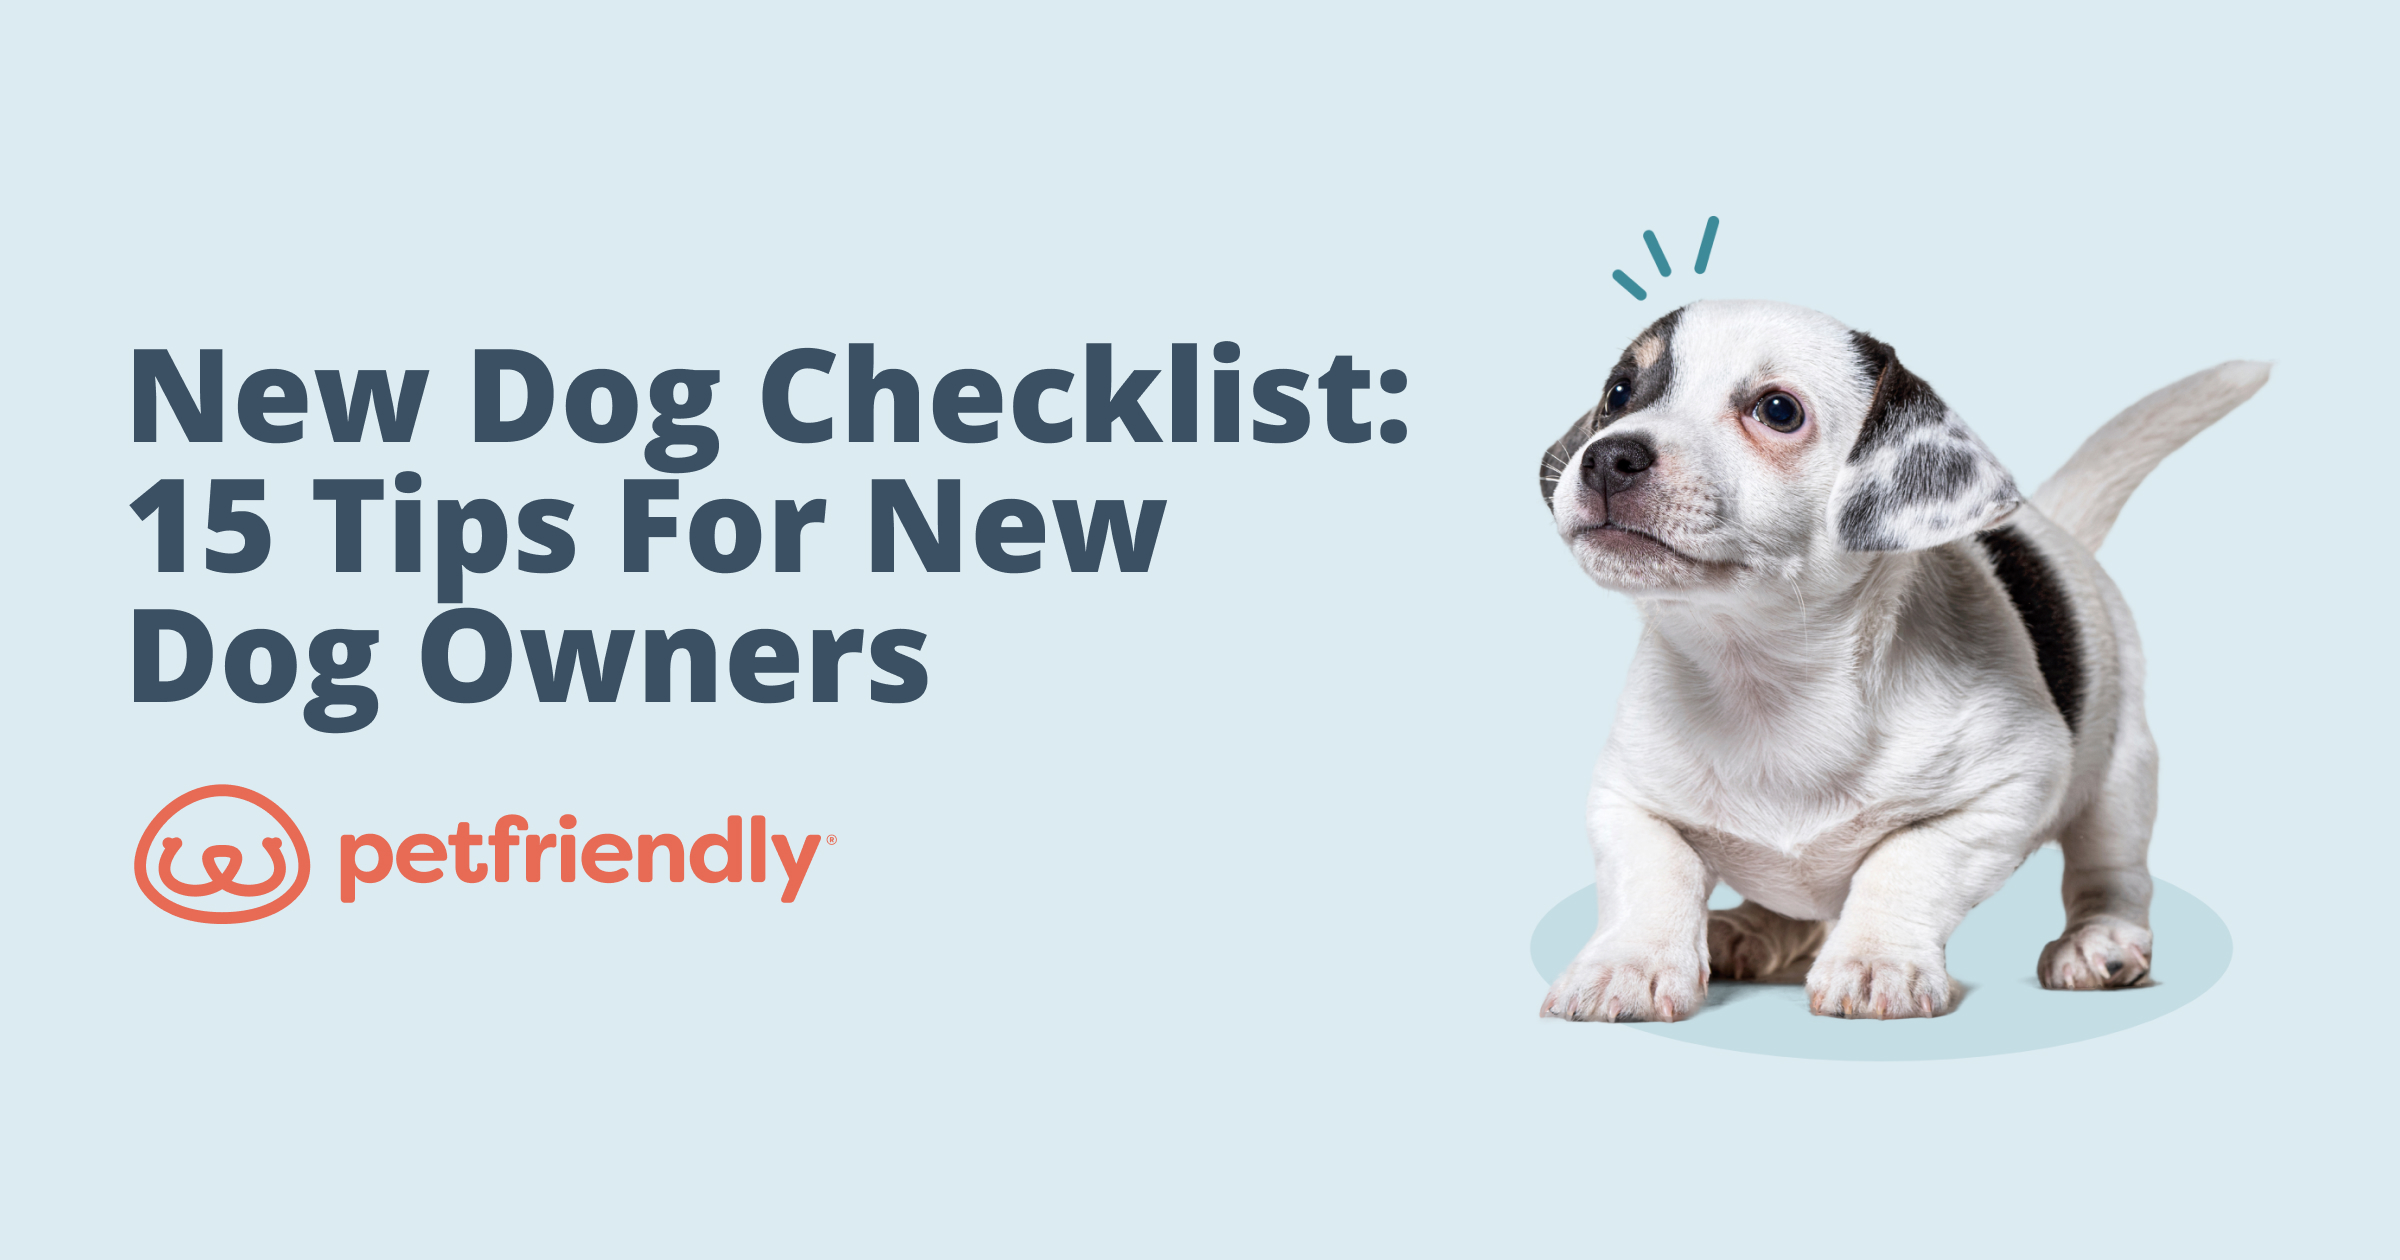 New Dog Owner's Guide  Tips for First-Time Dog & Puppy Owners